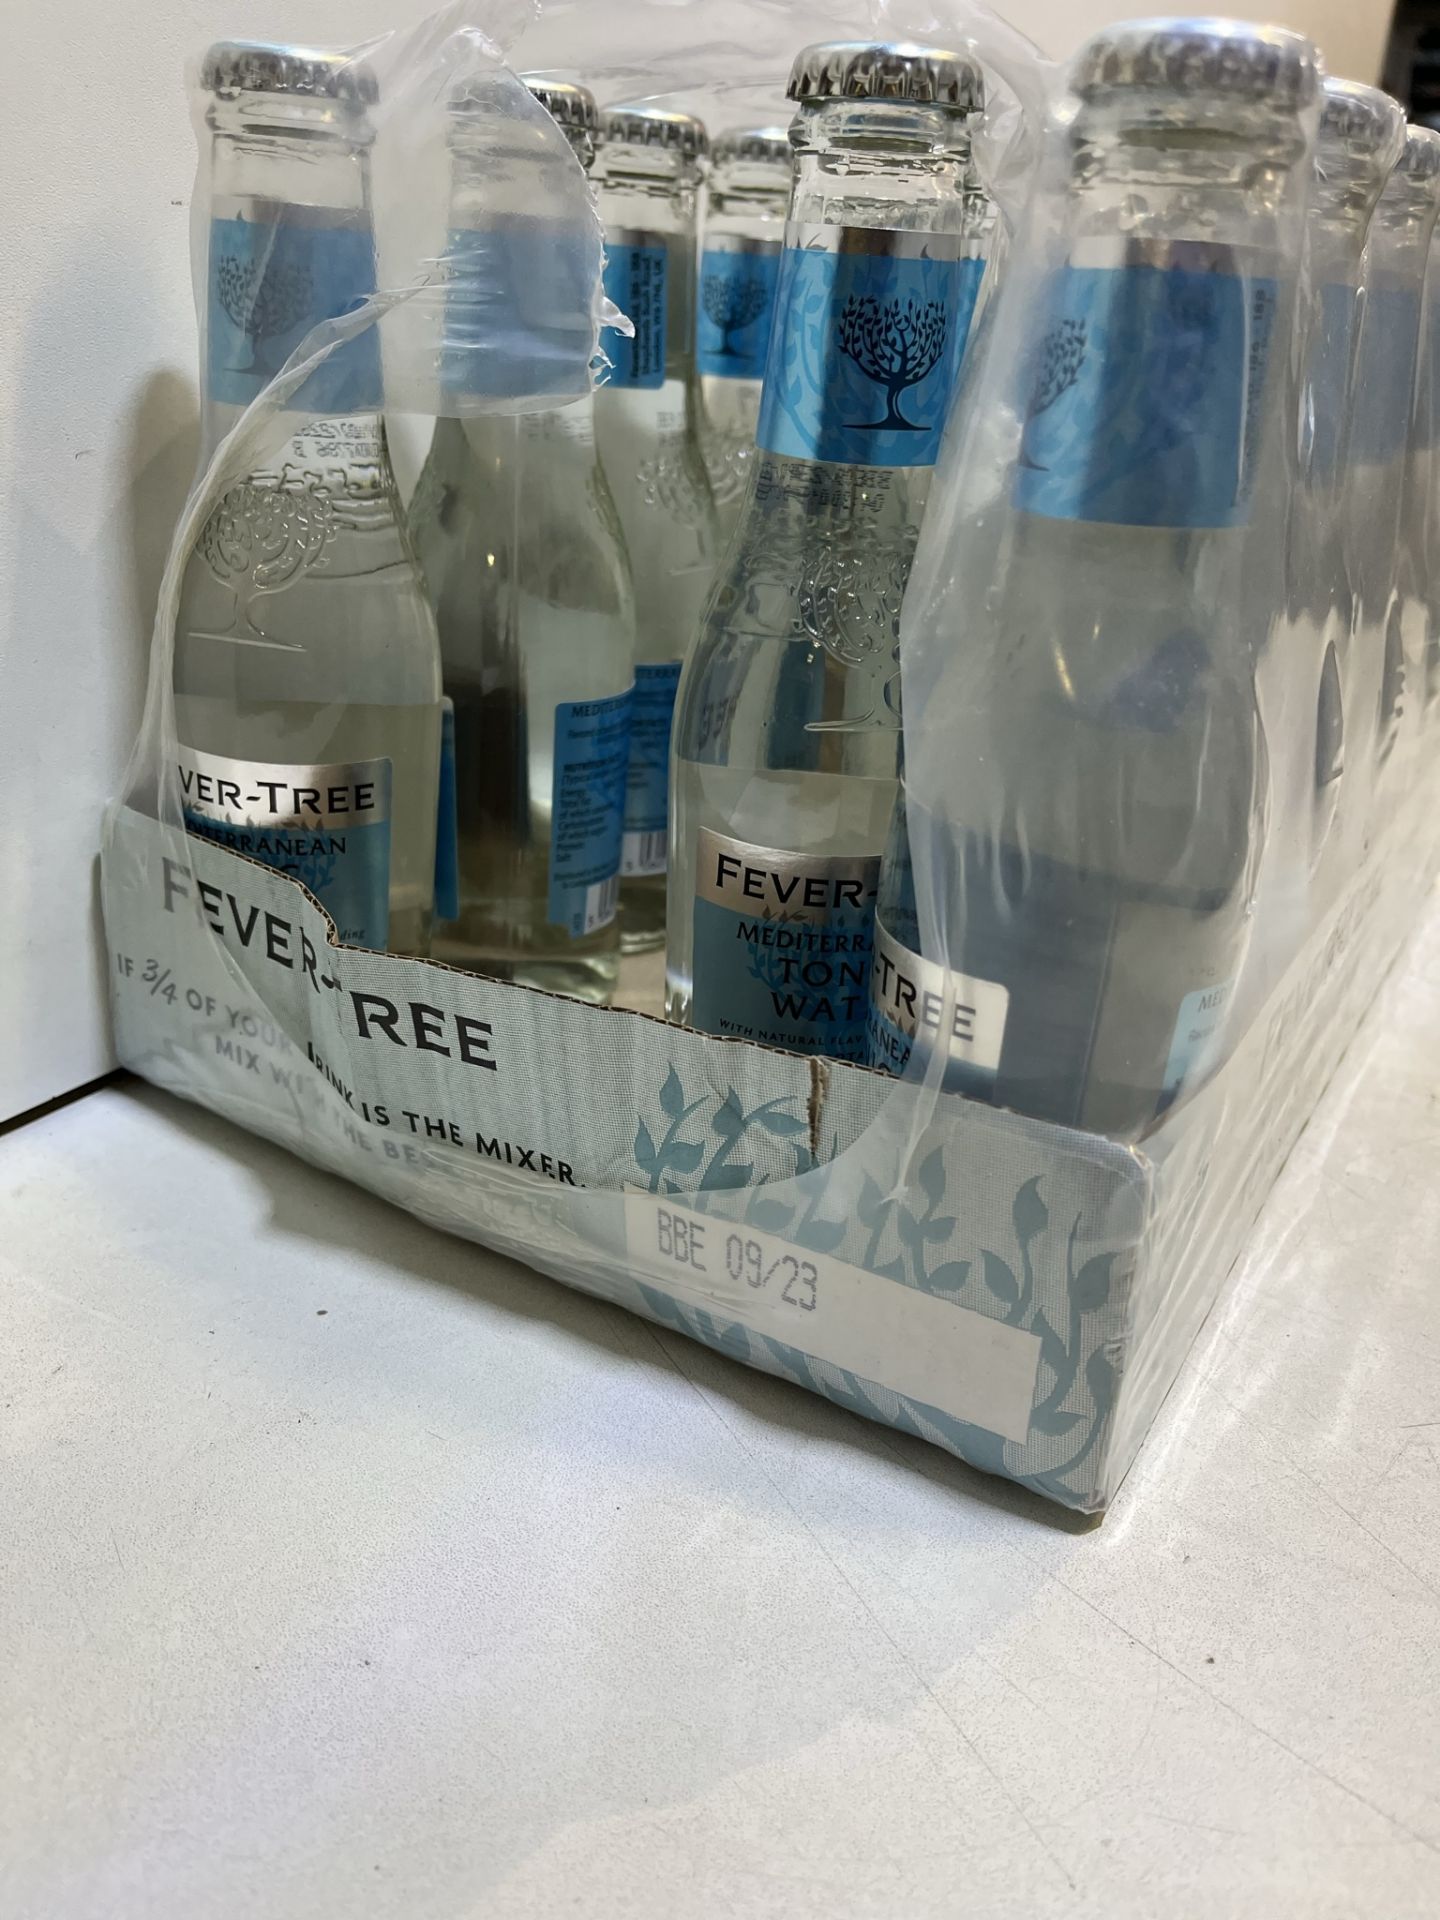 20 x Bottles Of 200ML Fever-Tree Citrus and Fresh Tonic Water - Image 3 of 3